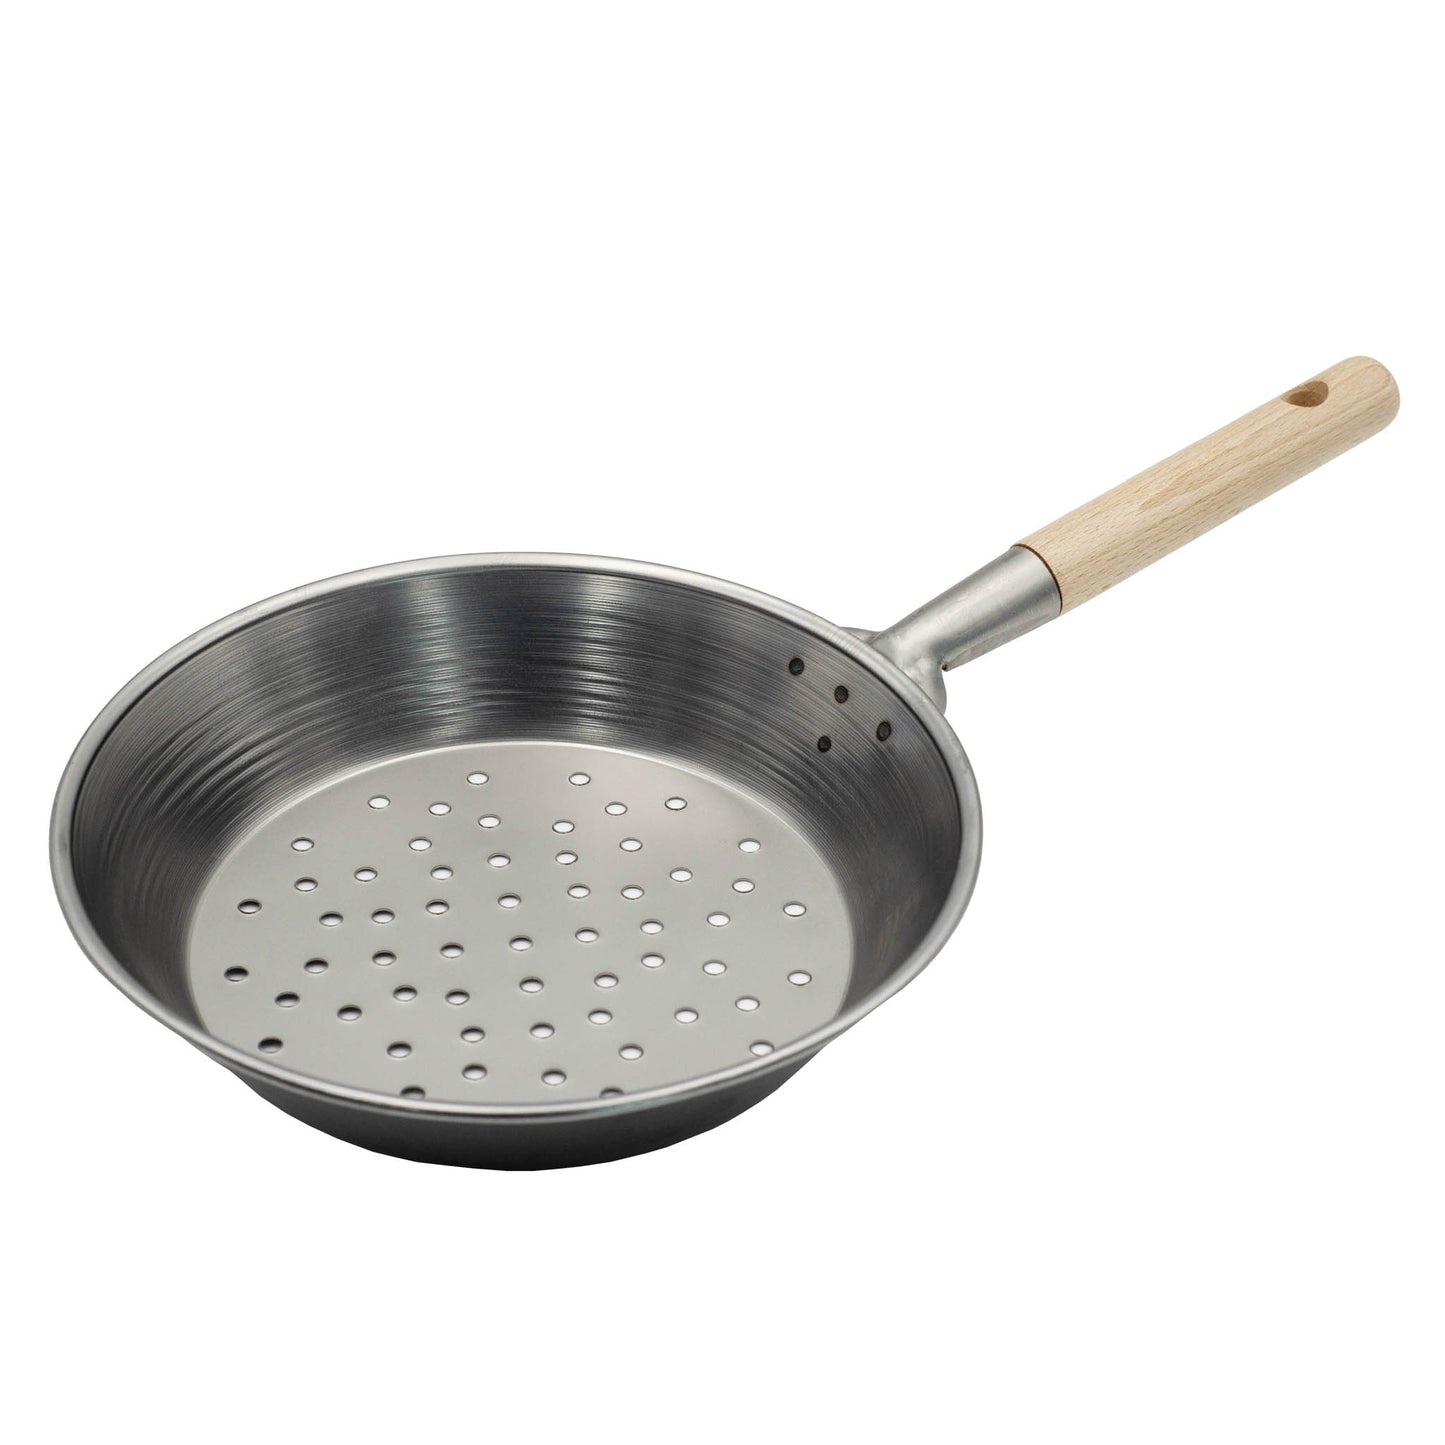 Chestnut roasting pan, 27cm with perforated metal base and wooden handle